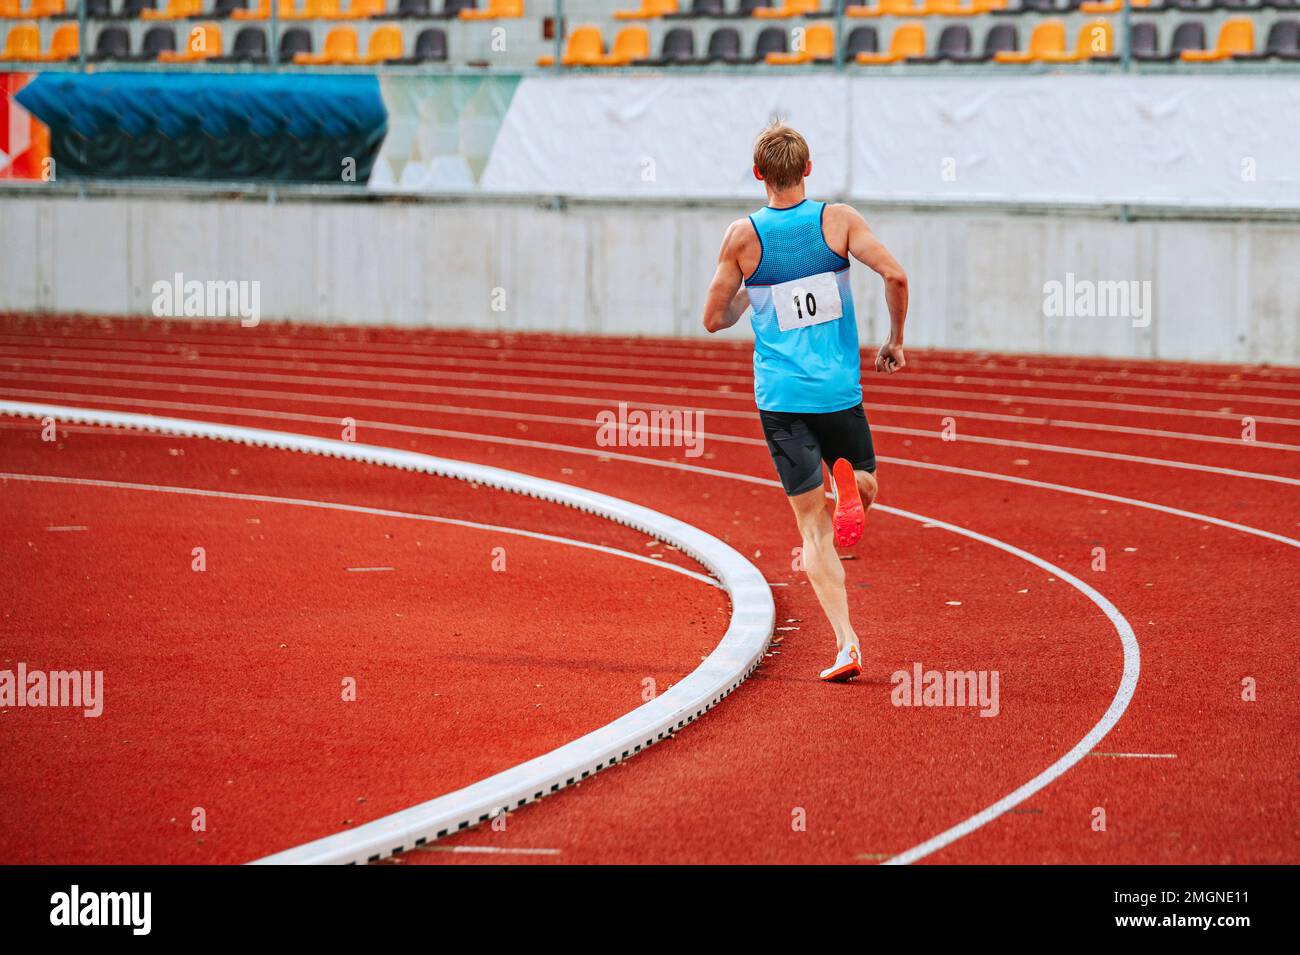 Intense male athlete at the peak of competition in a distance race on track. Suitable for sportswear, sports equipment or training campaigns Stock Photo